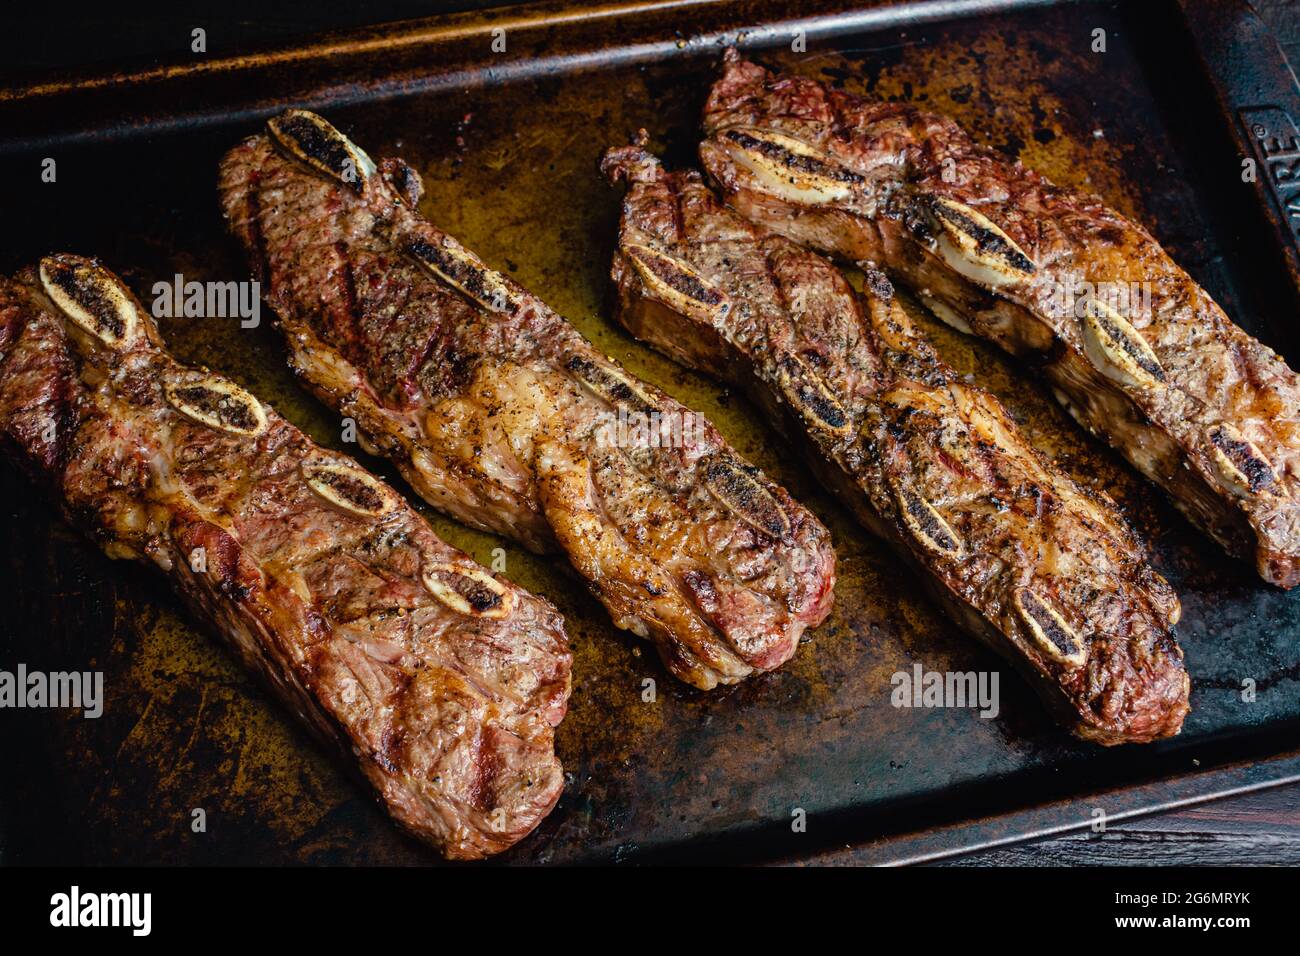 Grilled Beef Short Ribs on a Sheet Pan: Barbecue flanken beef ribs with a rustic background Stock Photo